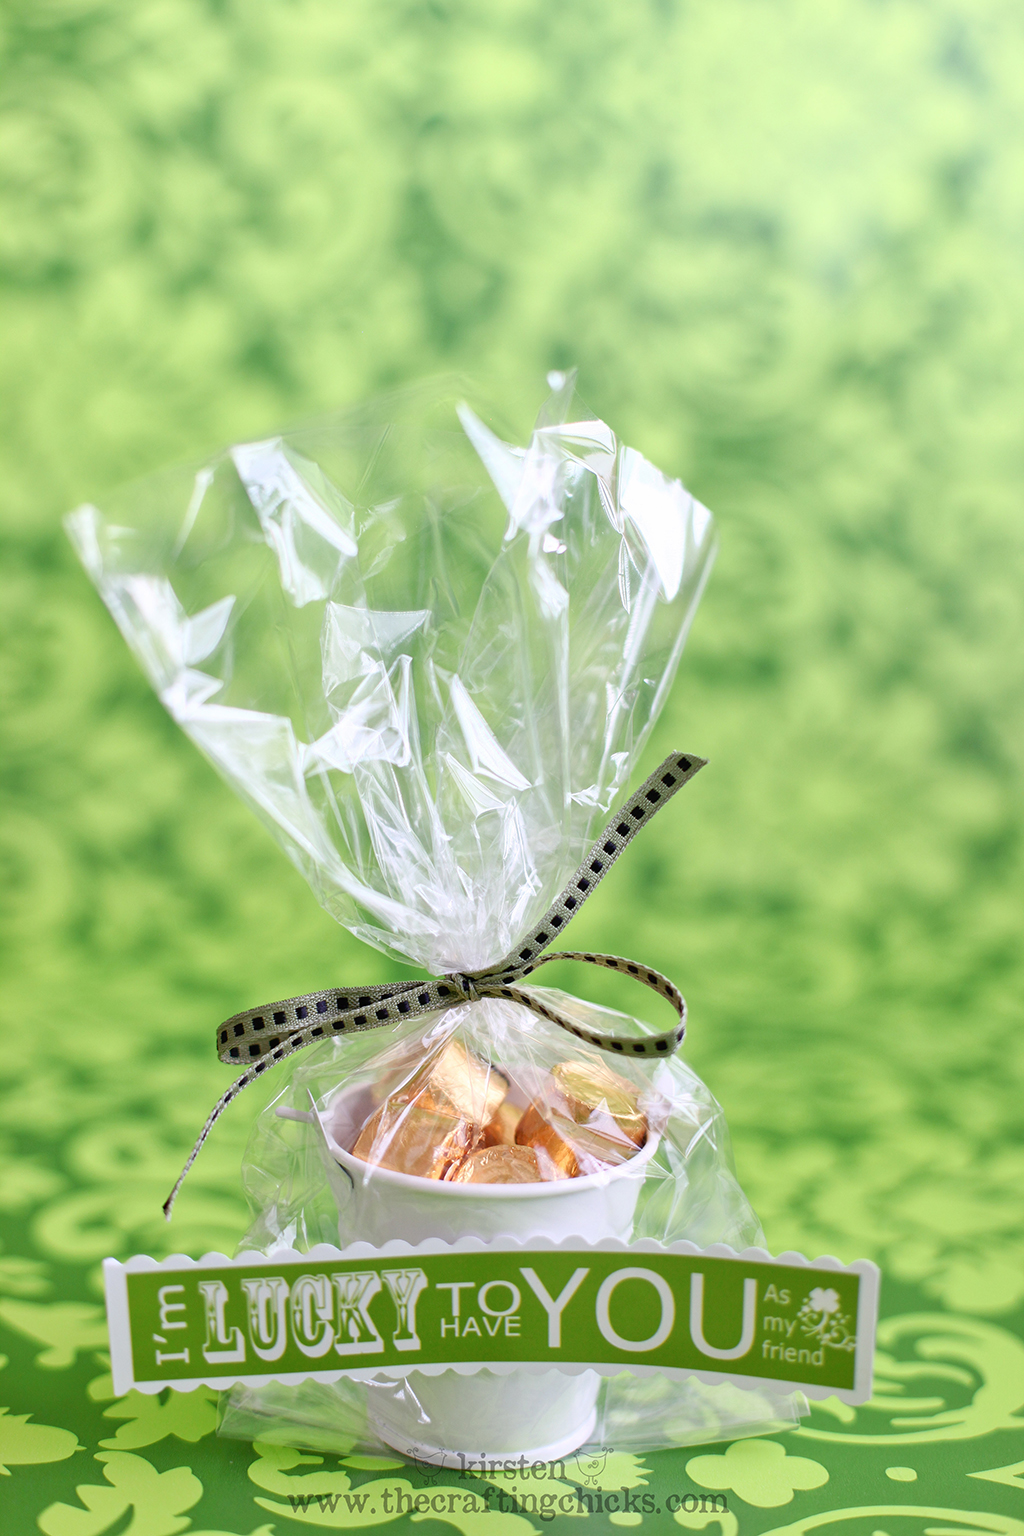 Green background withe small white buckets filled with gold wrapped candies in a clear cellophane bag and a green ribbon. A printable tag is attached that says "I'm lucky to have you."